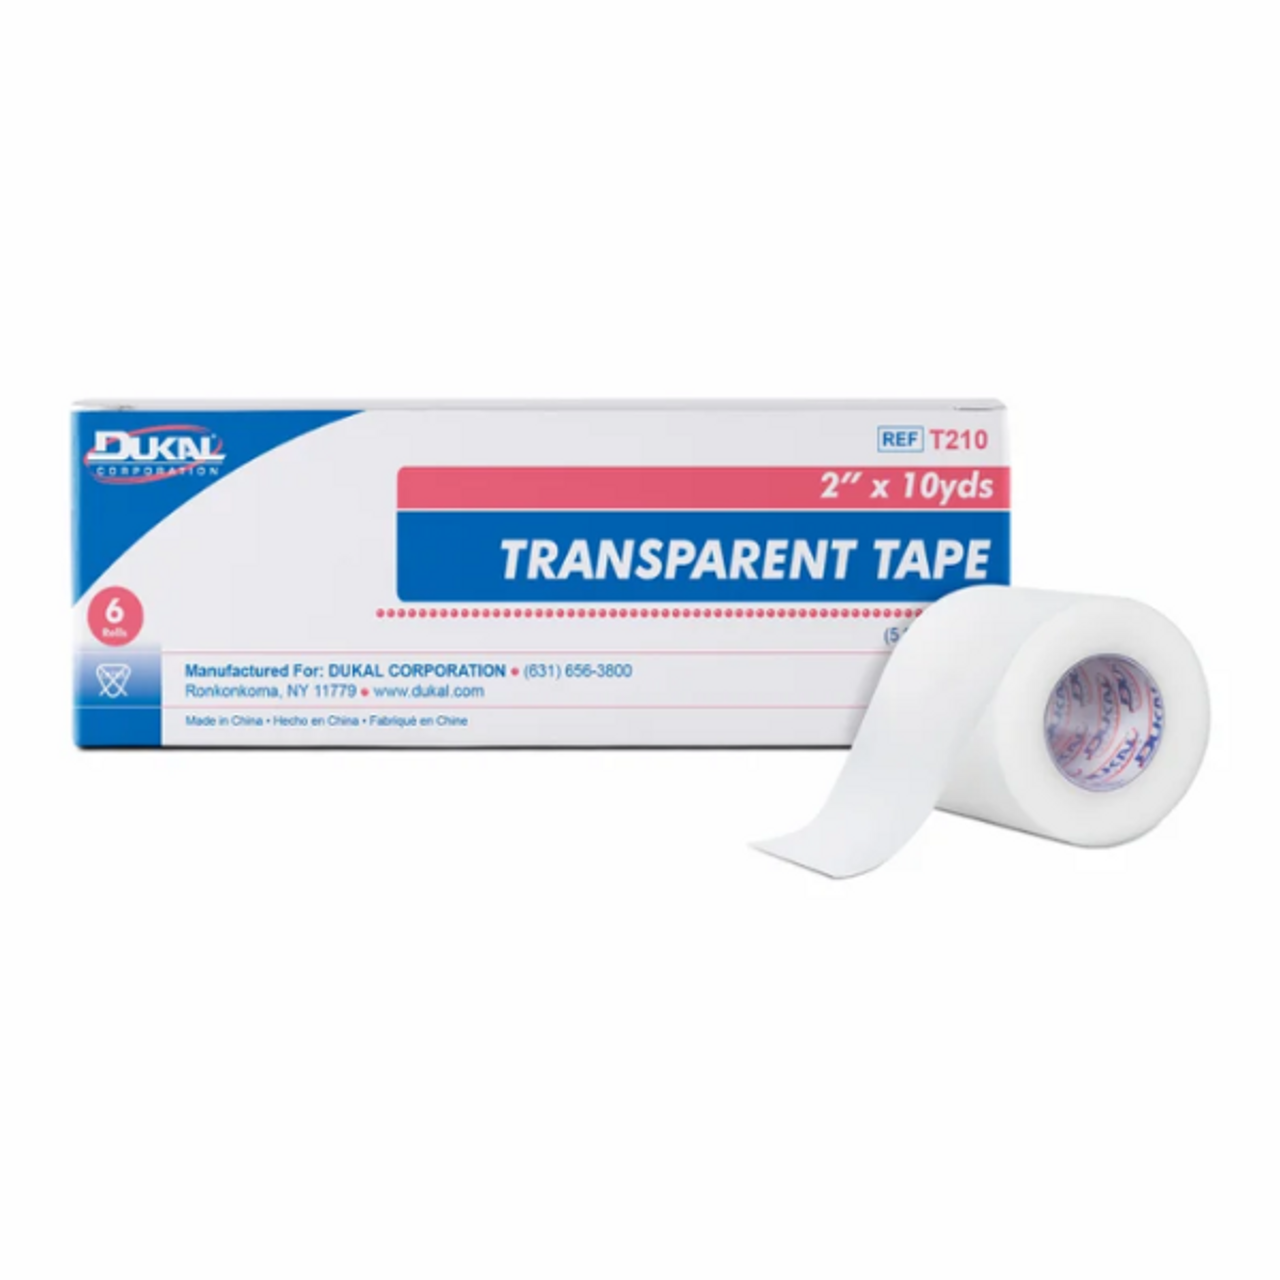 MEDICAL,TAPE,3M,TRANSPARENT,2X10YDS,PLASTIC,NONSTERILE,12/BX, Wound Care